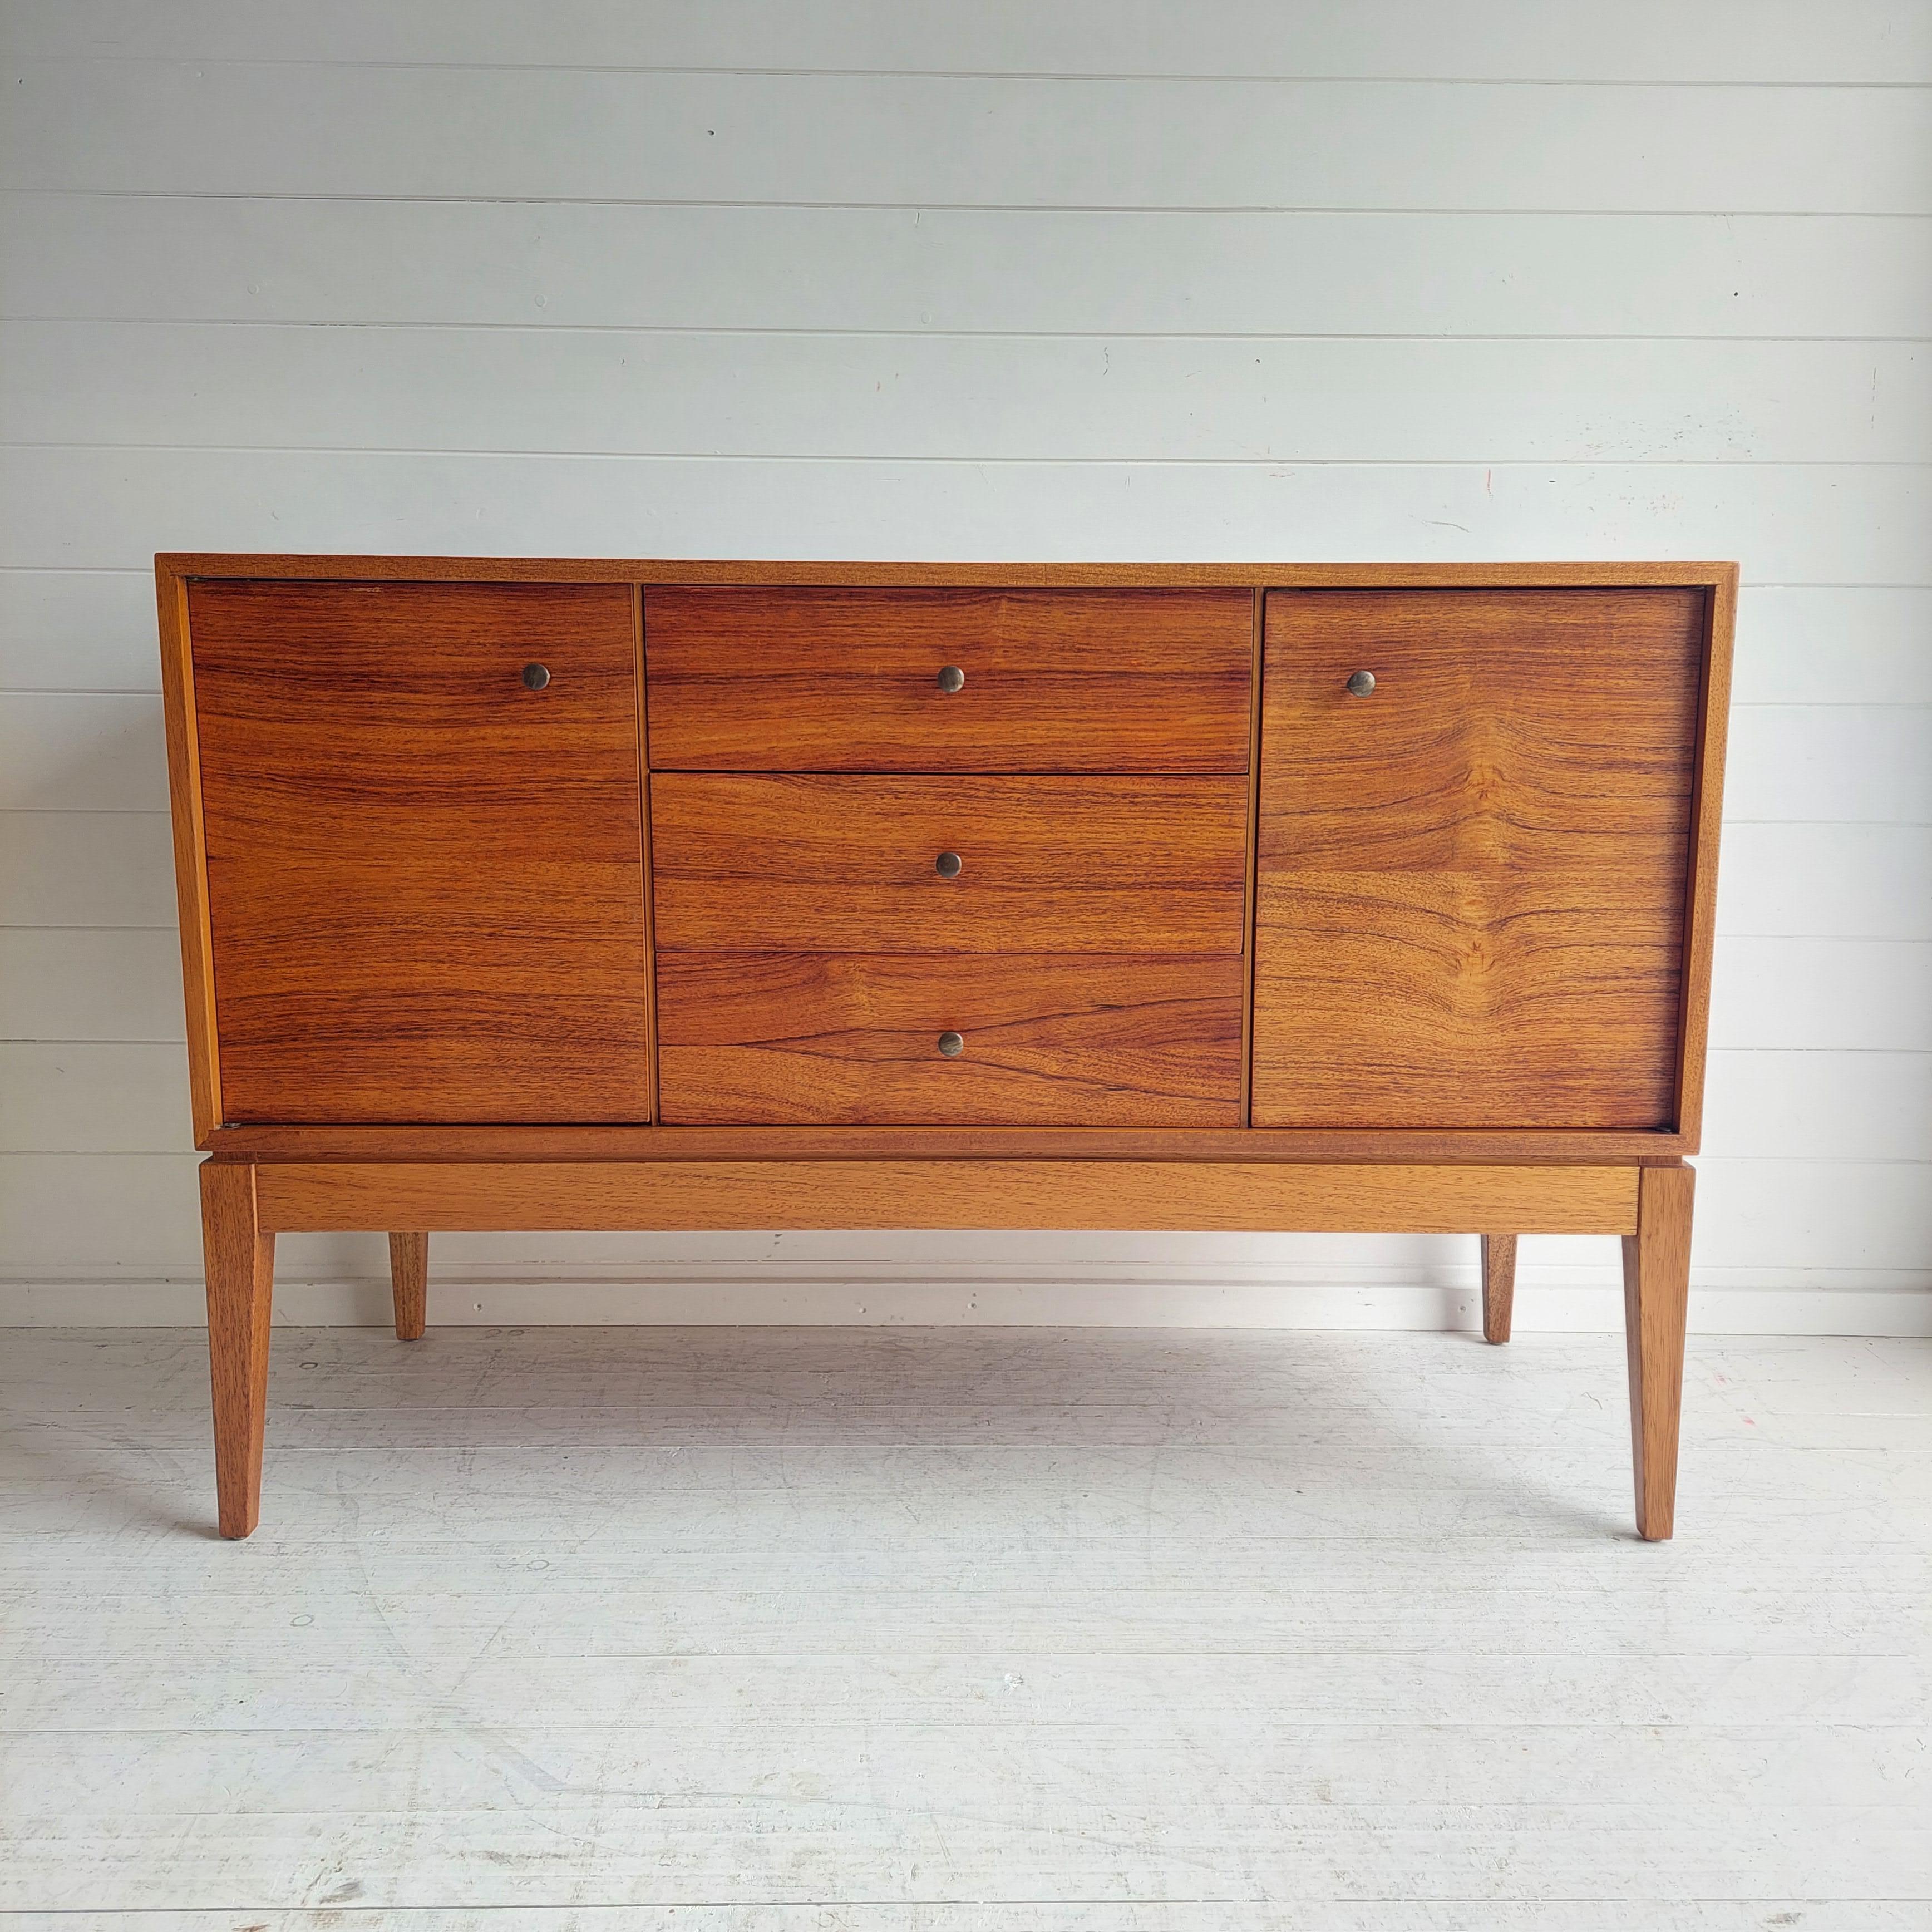 A beautifully designed and rare Mid Century sideboard designed by Peter Hayward for Uniflex of Great Britain.
Restored condition

Featuring contrasting walnut  drawers and door fronts which contrast beautifully with the main carcass of the unit, and